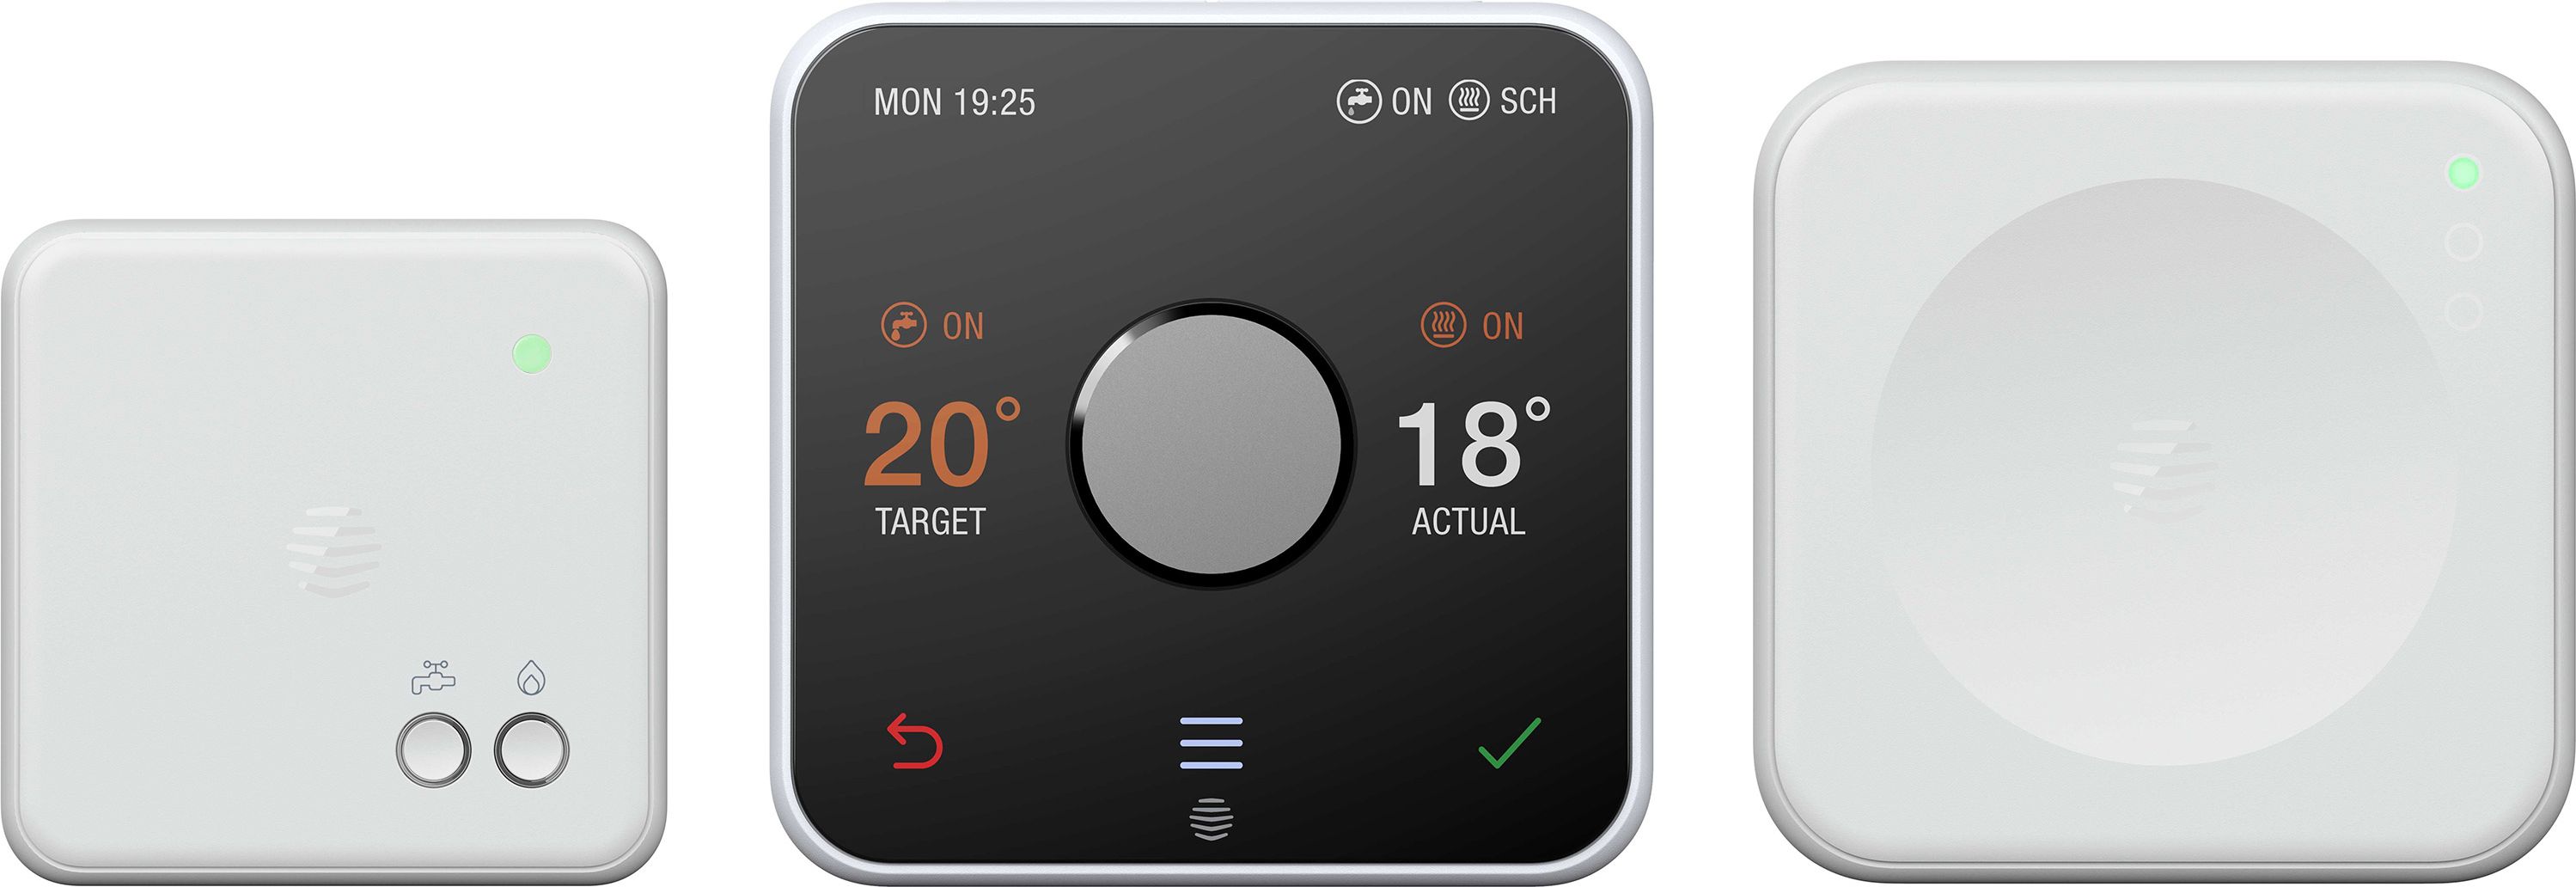 Hive Active Heating V3 For Conventional Boilers Smart Thermostat - Requires Professional Install - White, White